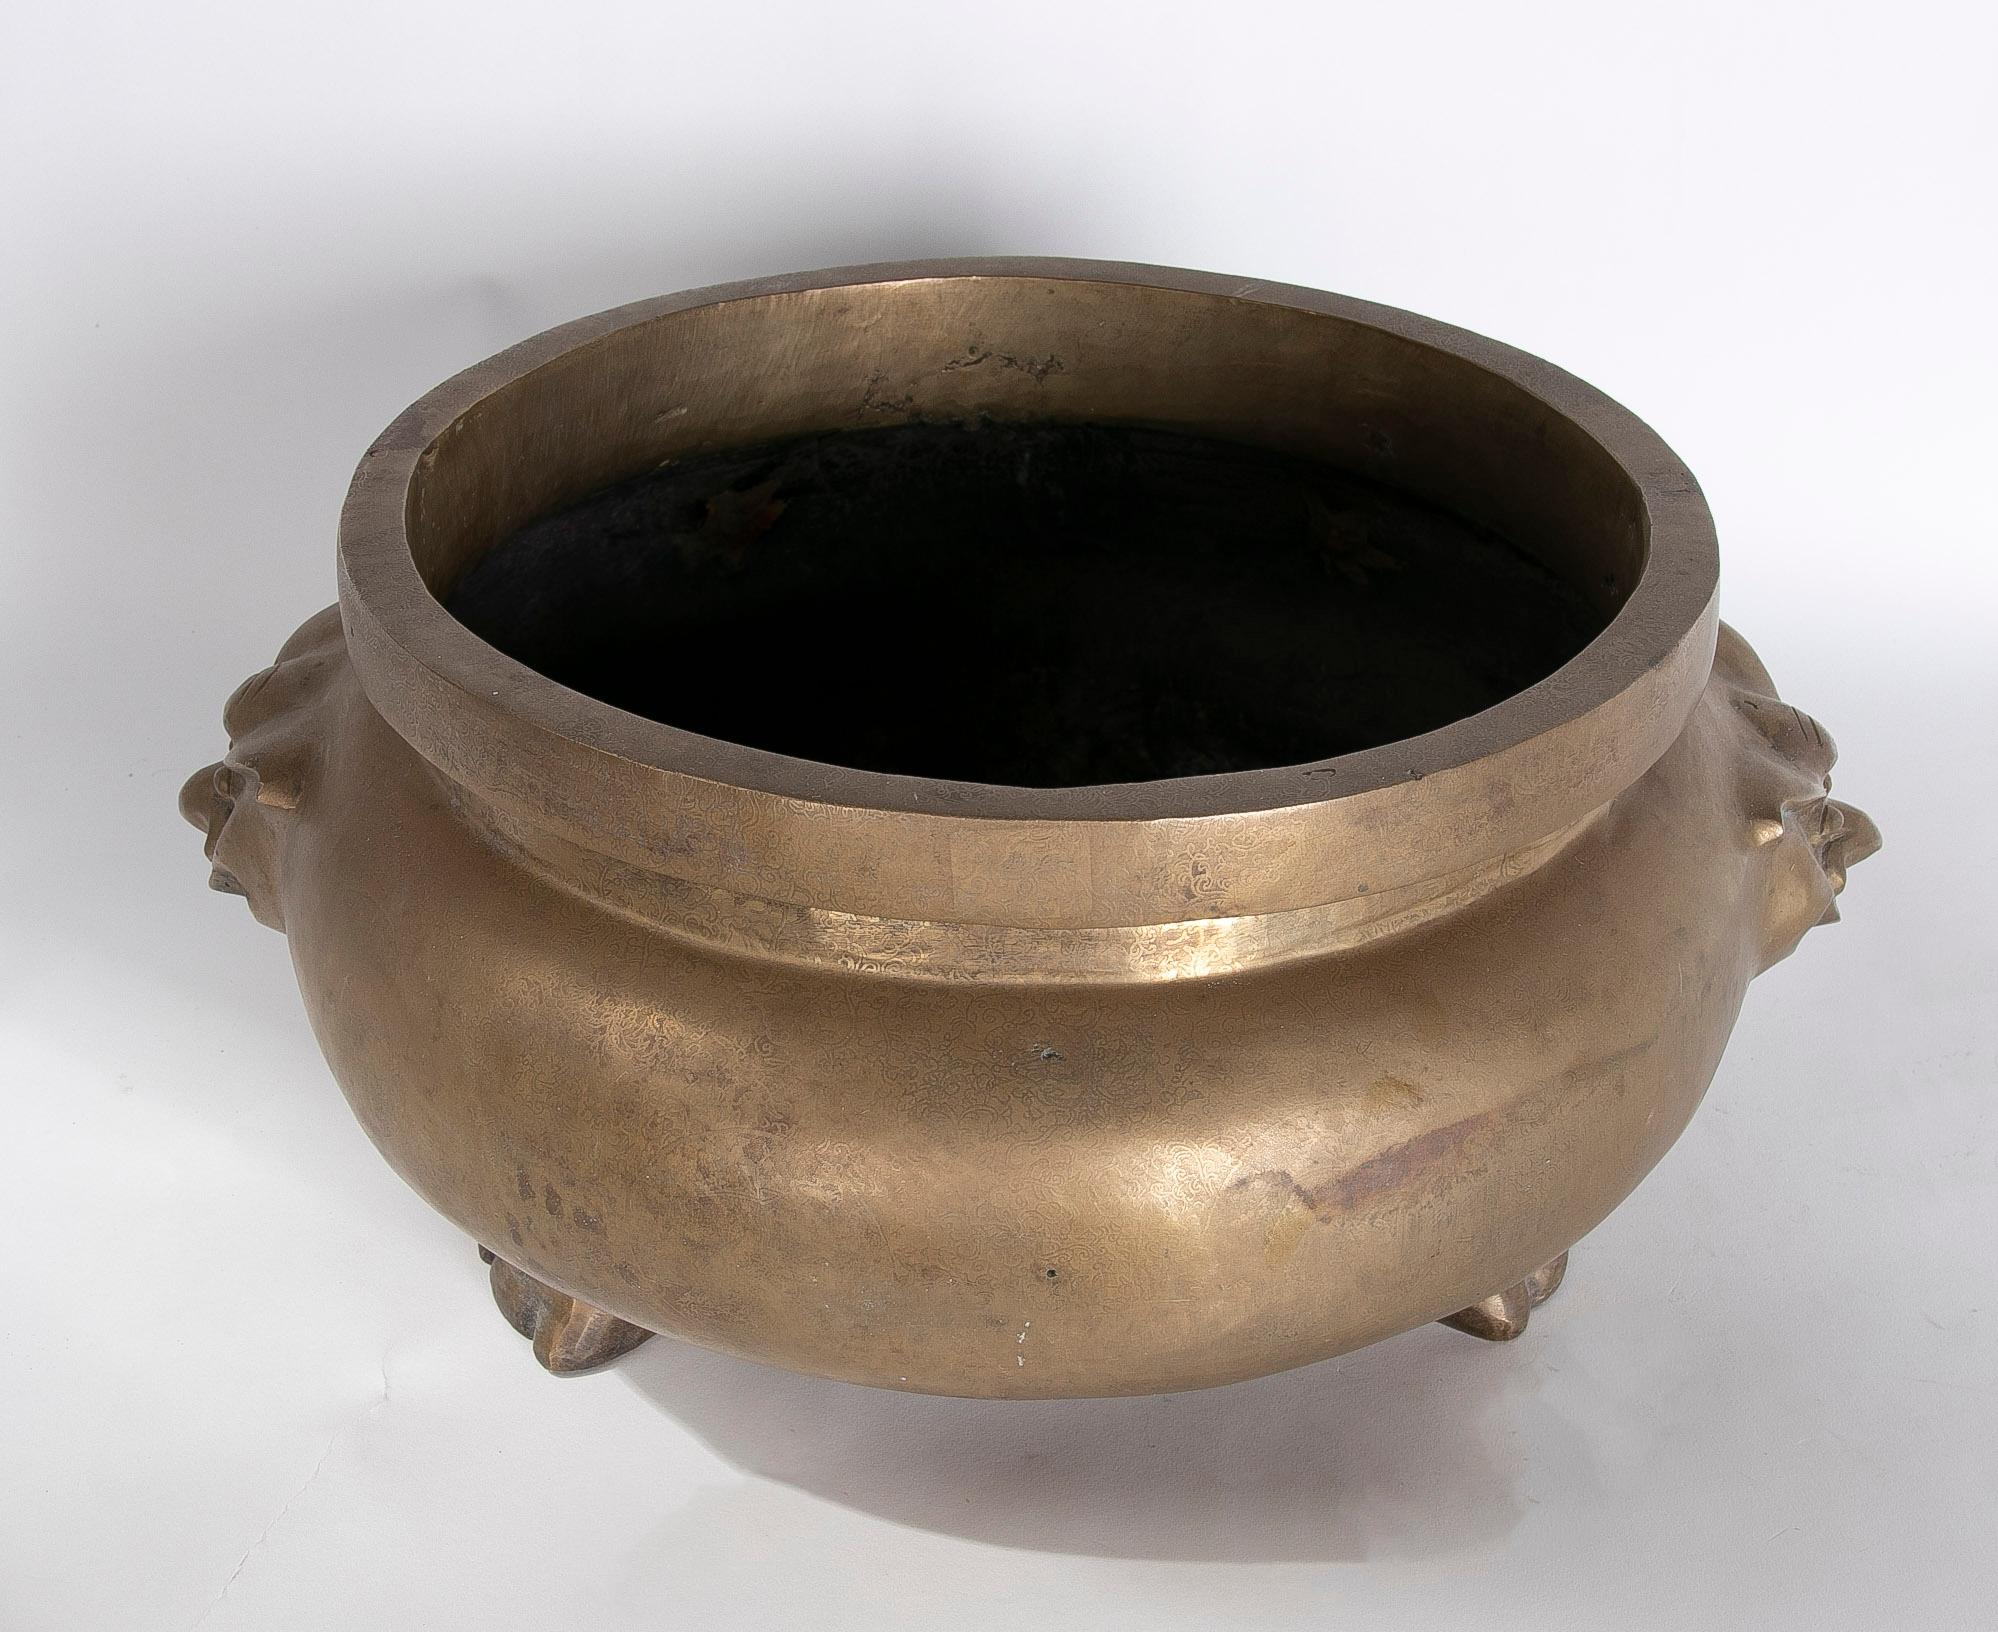 Round bronze vessel with two-sided decoration and foot-shaped feet.